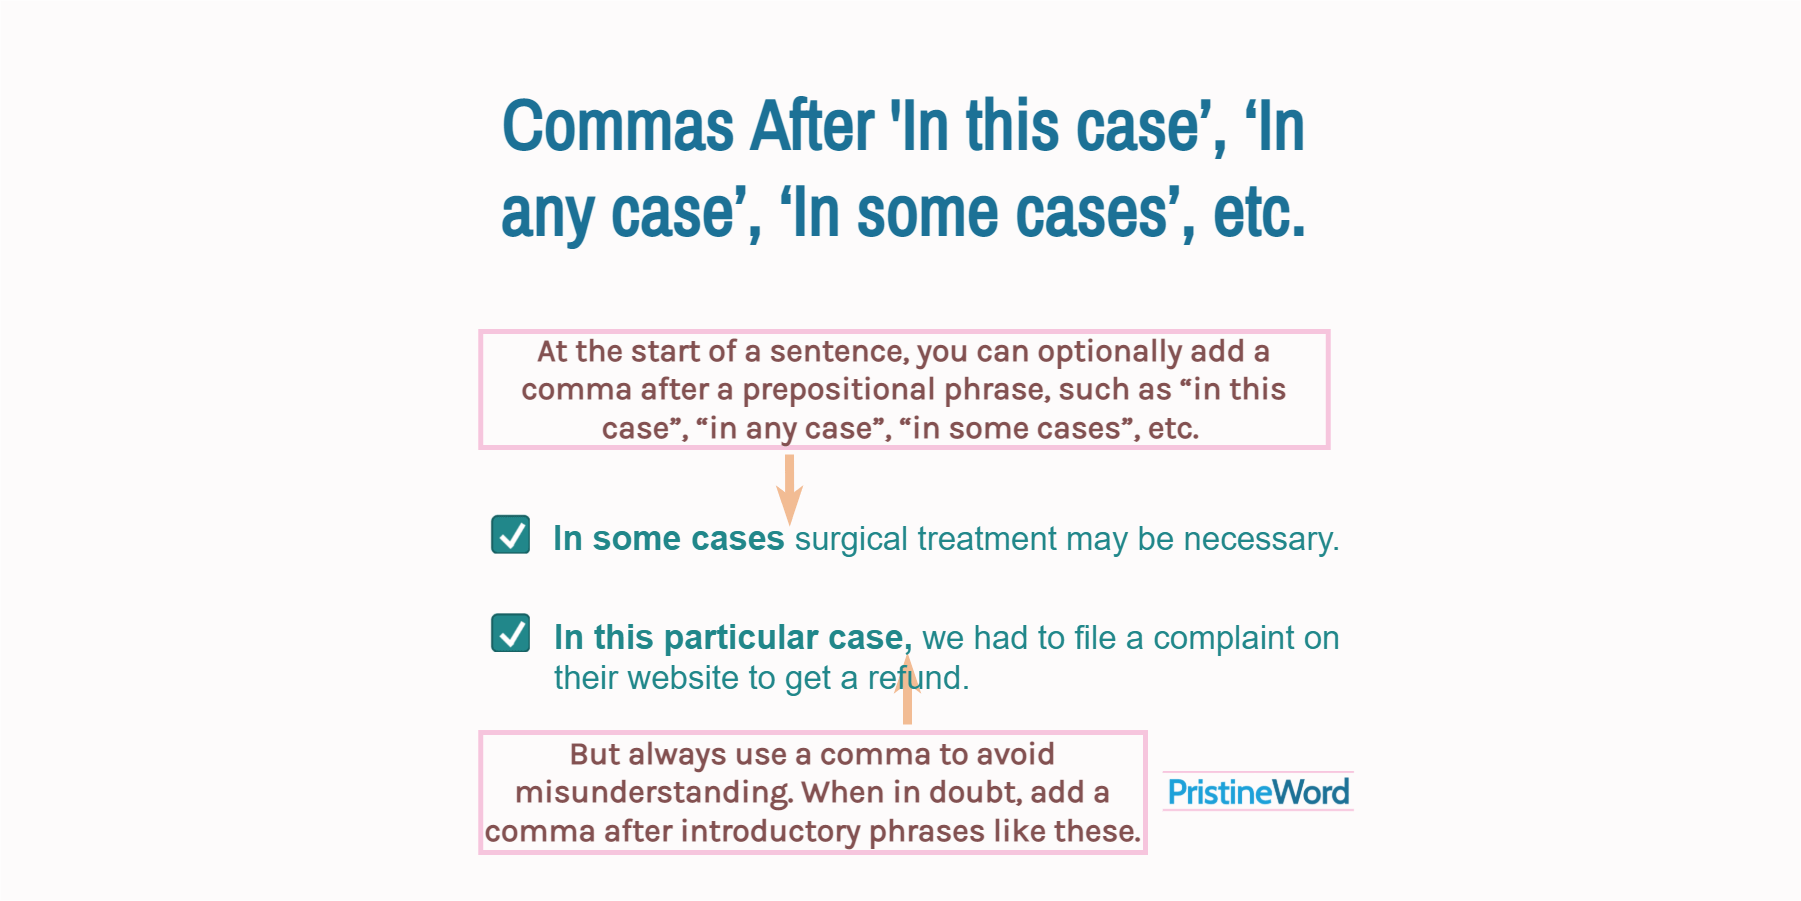 Do You Need a Comma After ‘In this case’, ‘In any case’, ‘In some cases’, ‘In such a case’, etc.?